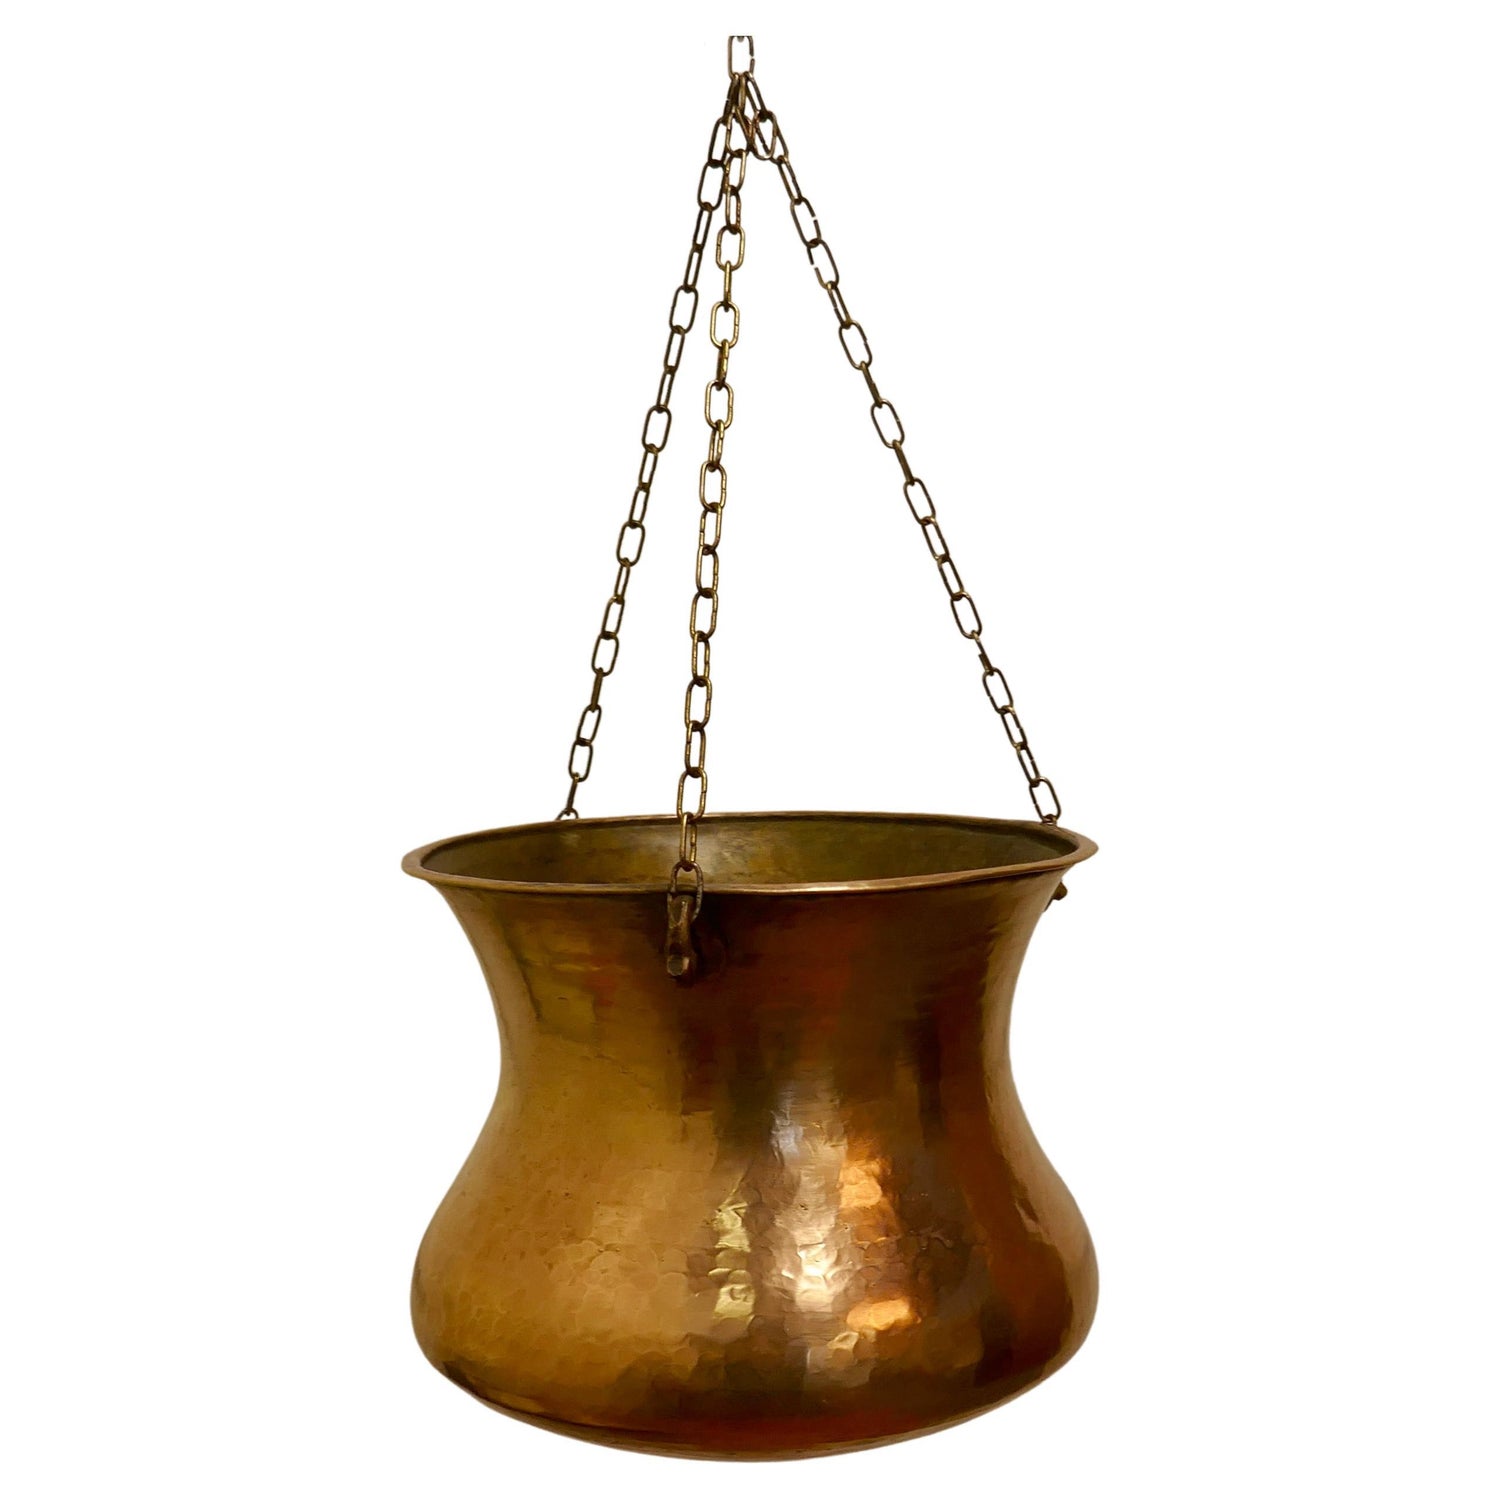 ANTIQUE BRASS TALL COOKING POT WITH TIN LINING - Velan Store